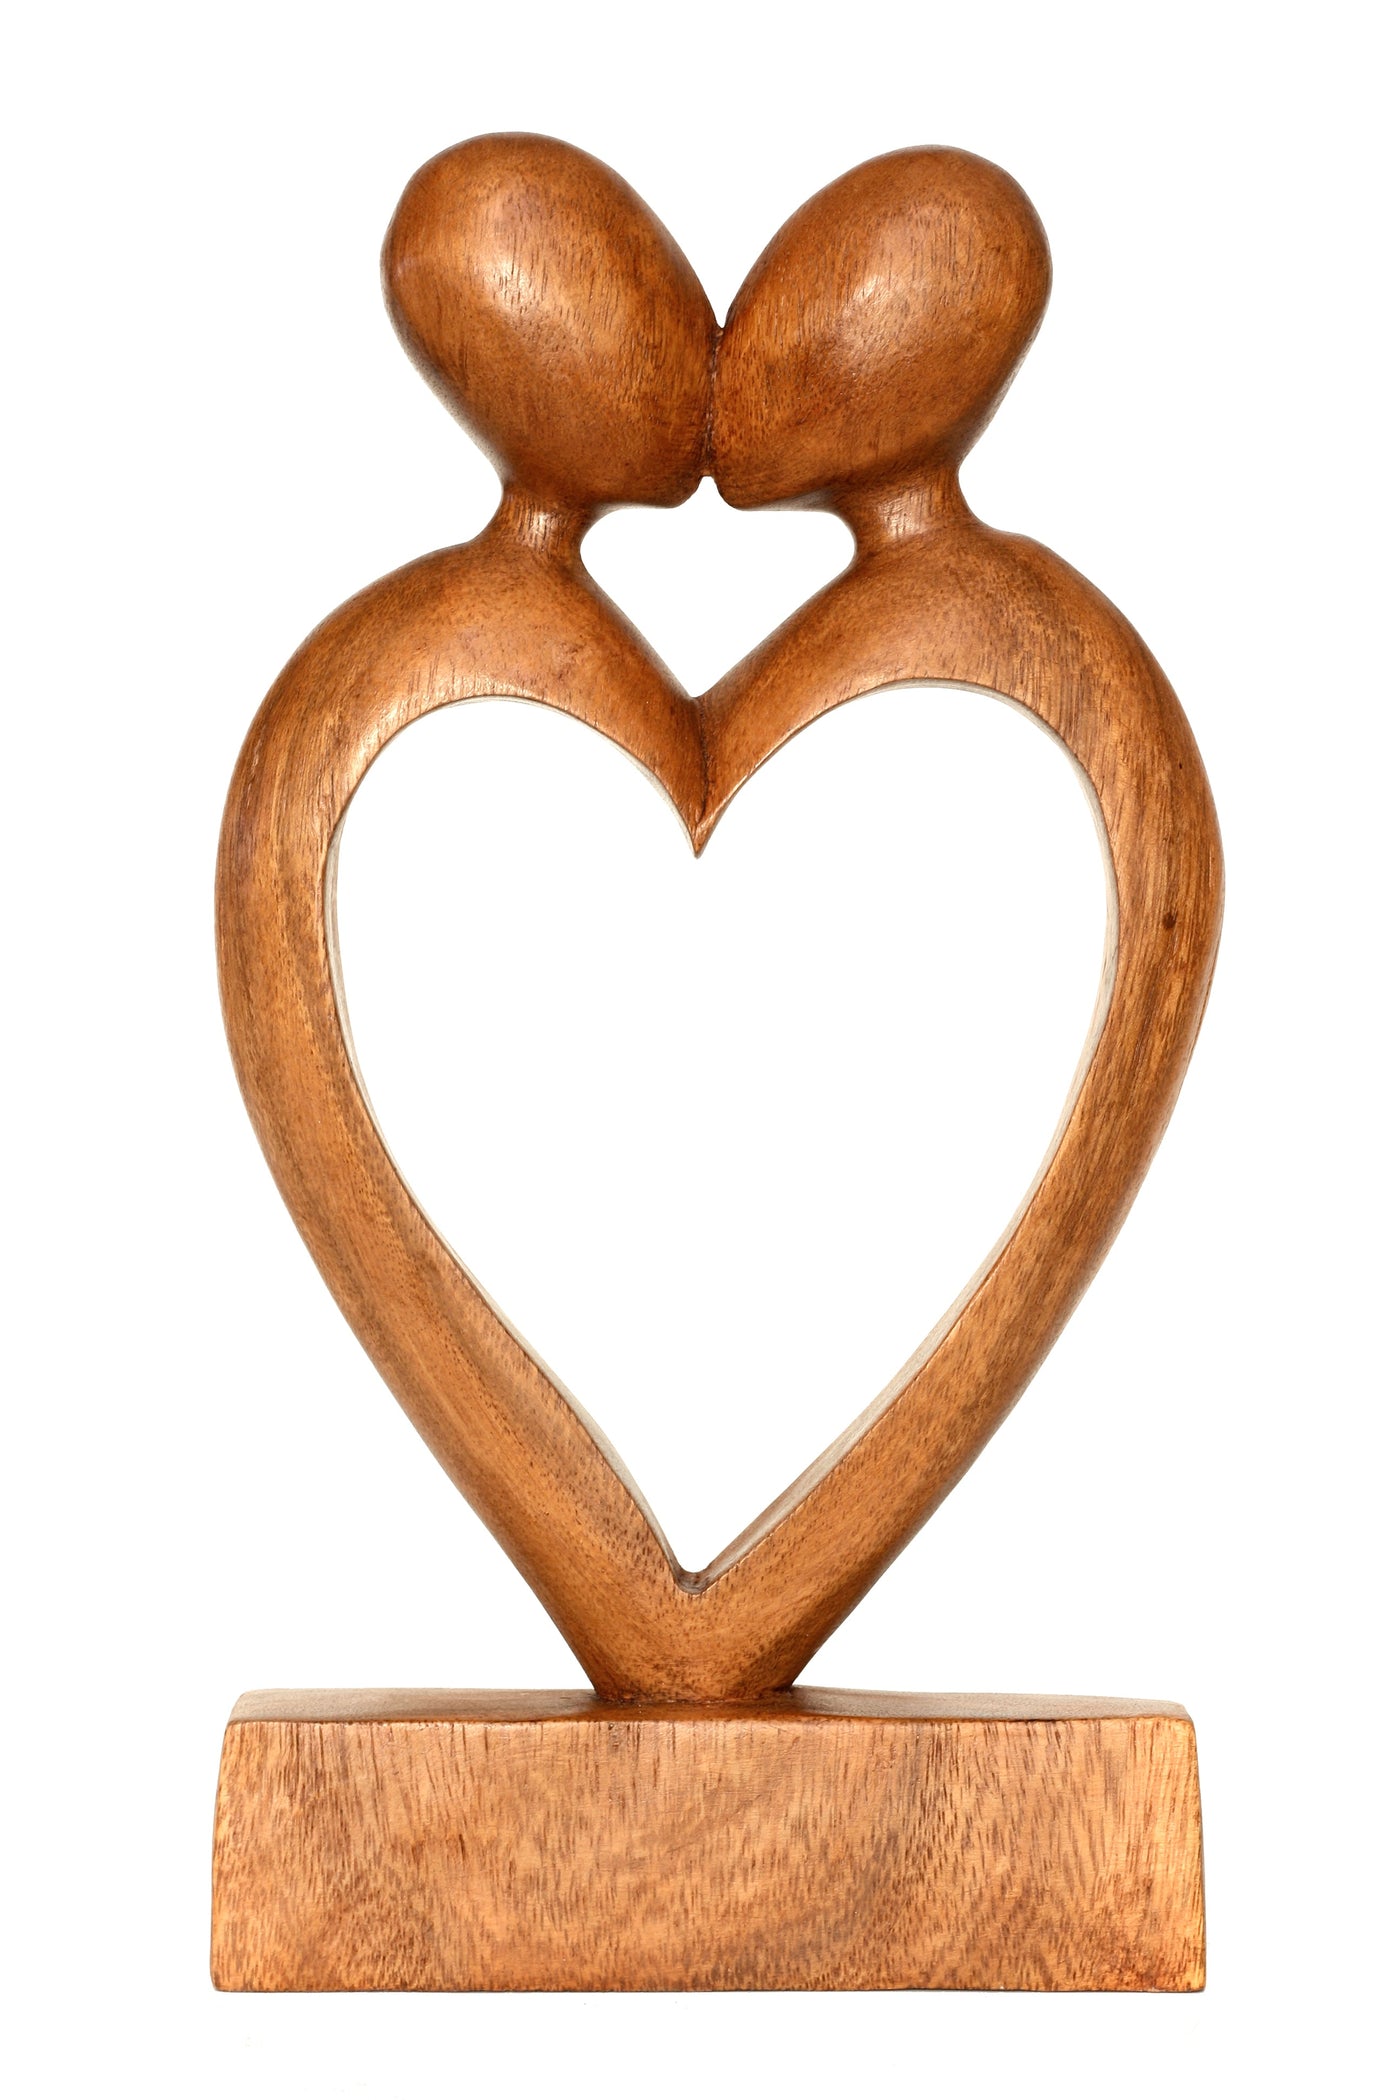 12" Wooden Handmade Abstract Sculpture Statue Handcrafted "Loving You" Gift Art Decorative Home Decor Figurine Accent Decoration Artwork Hand Carved